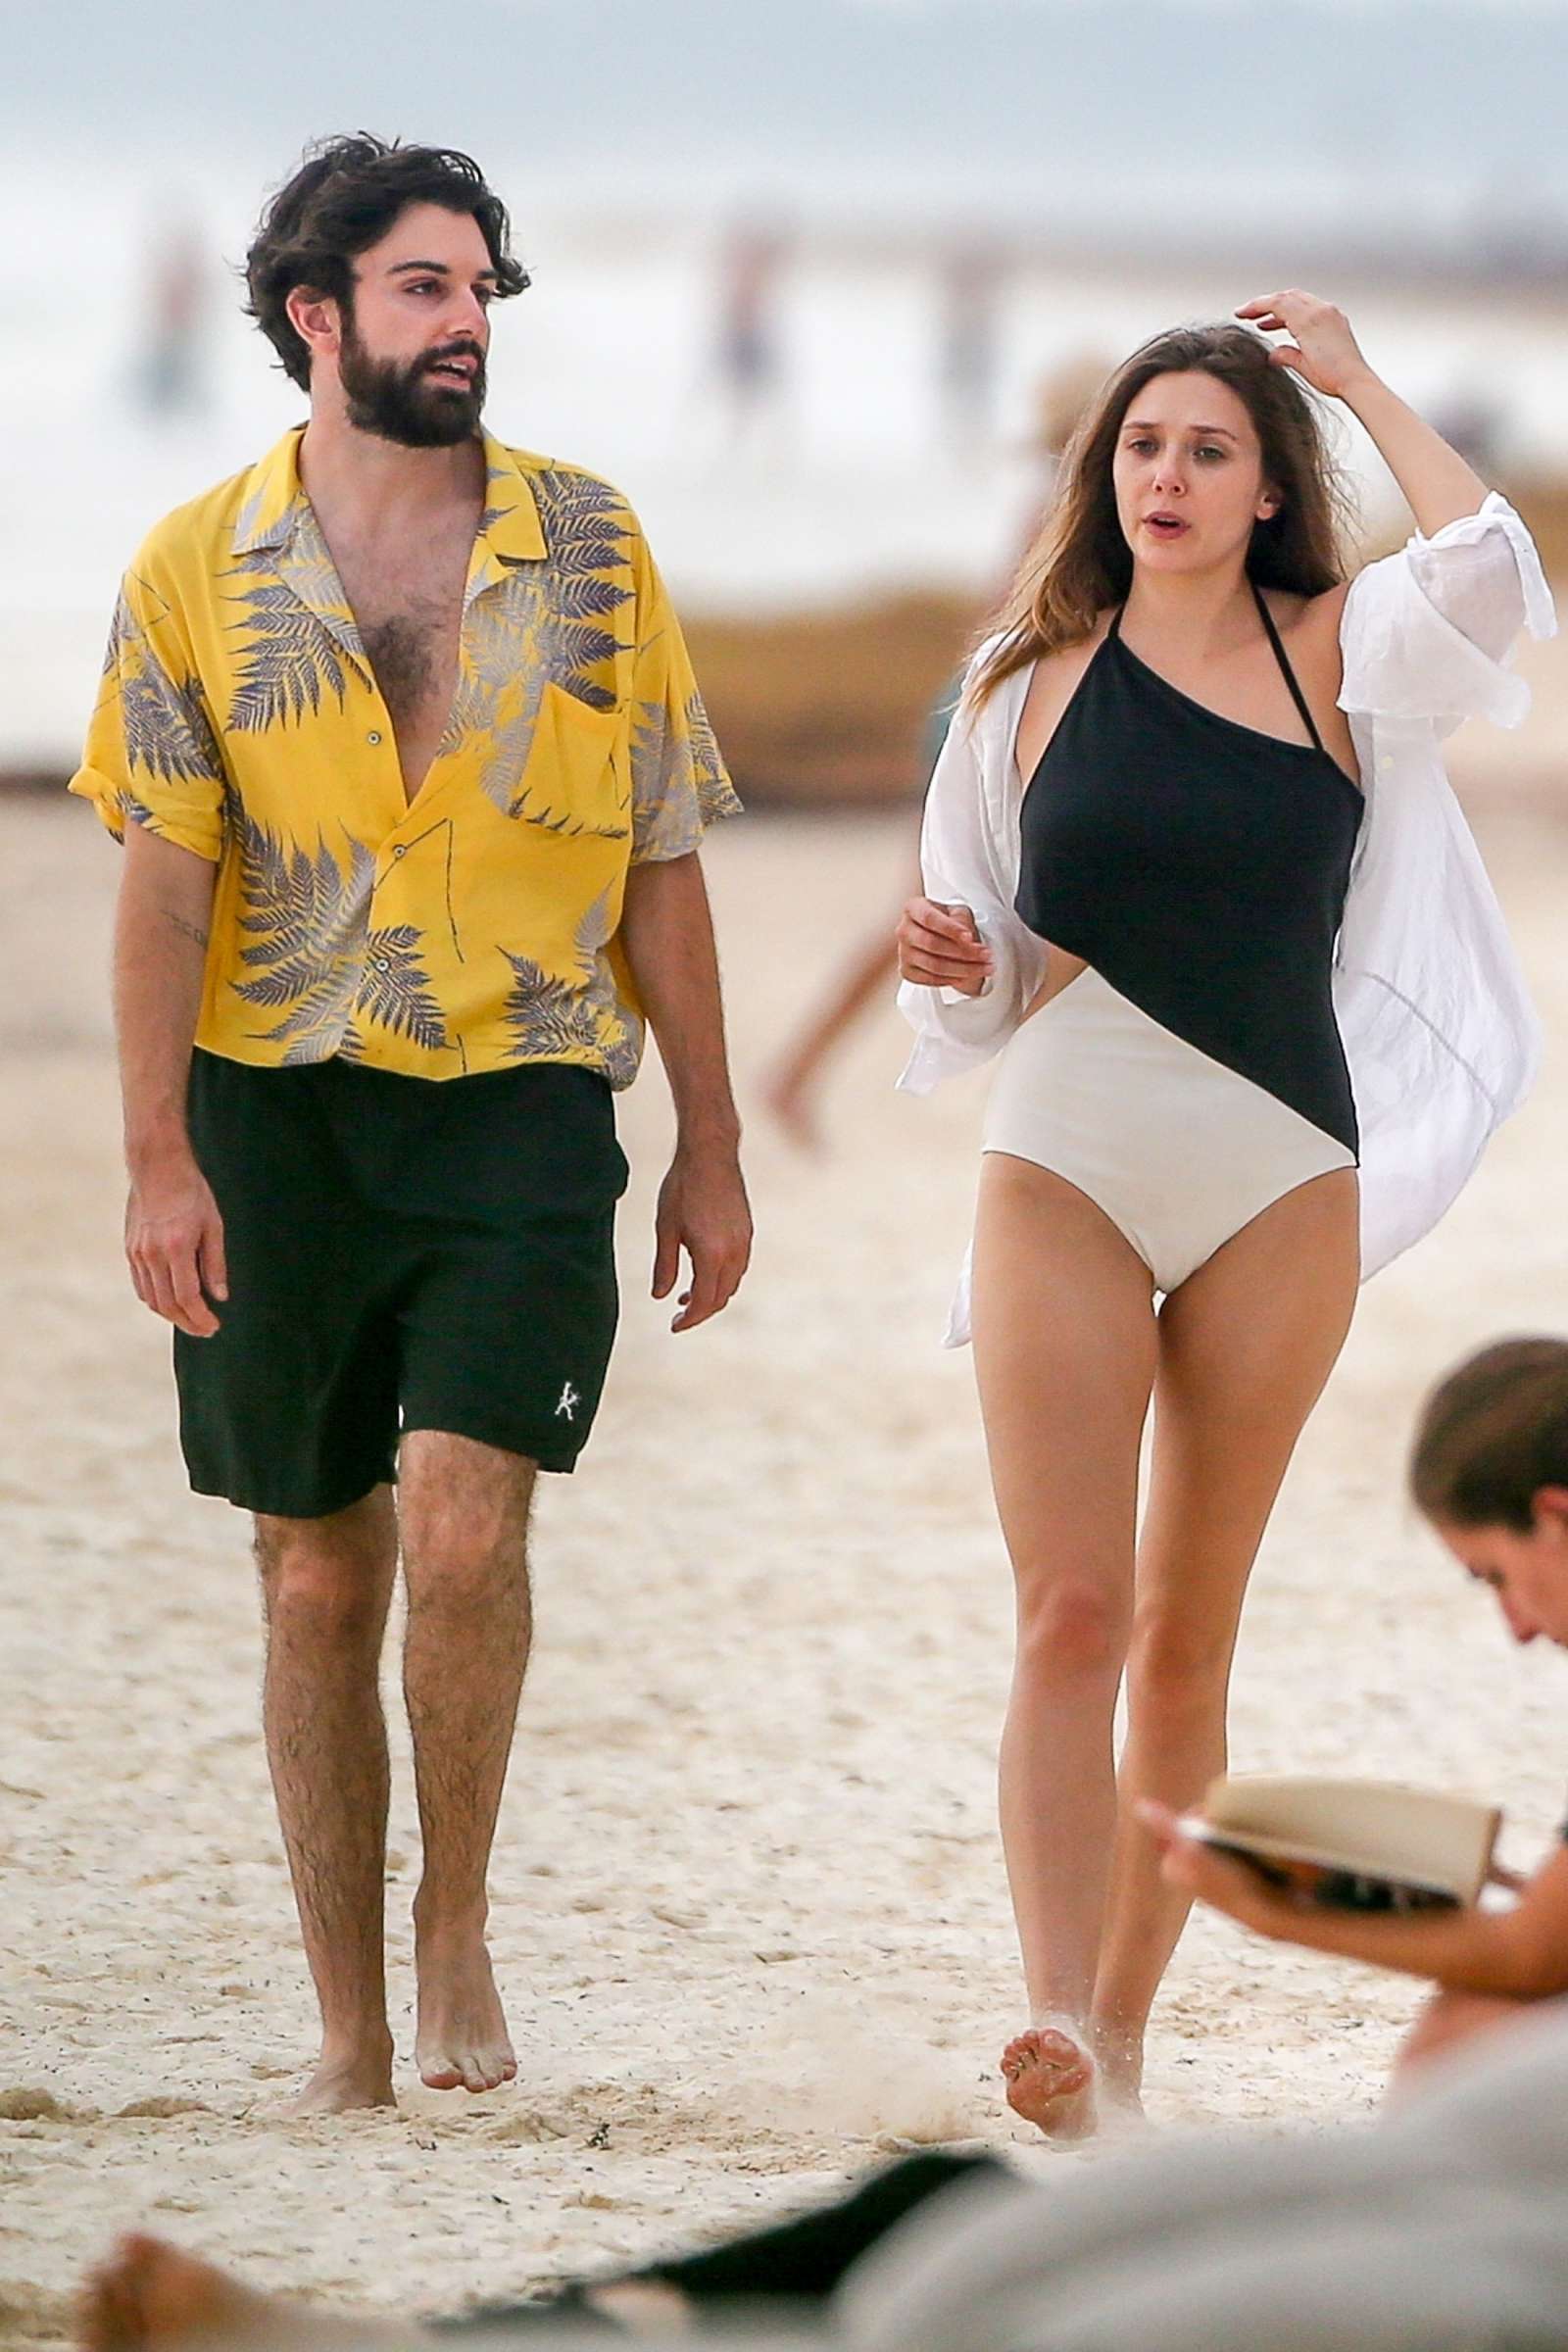 Elizabeth Olsen in Black and White Swimsuit at a beach in Mexico. 